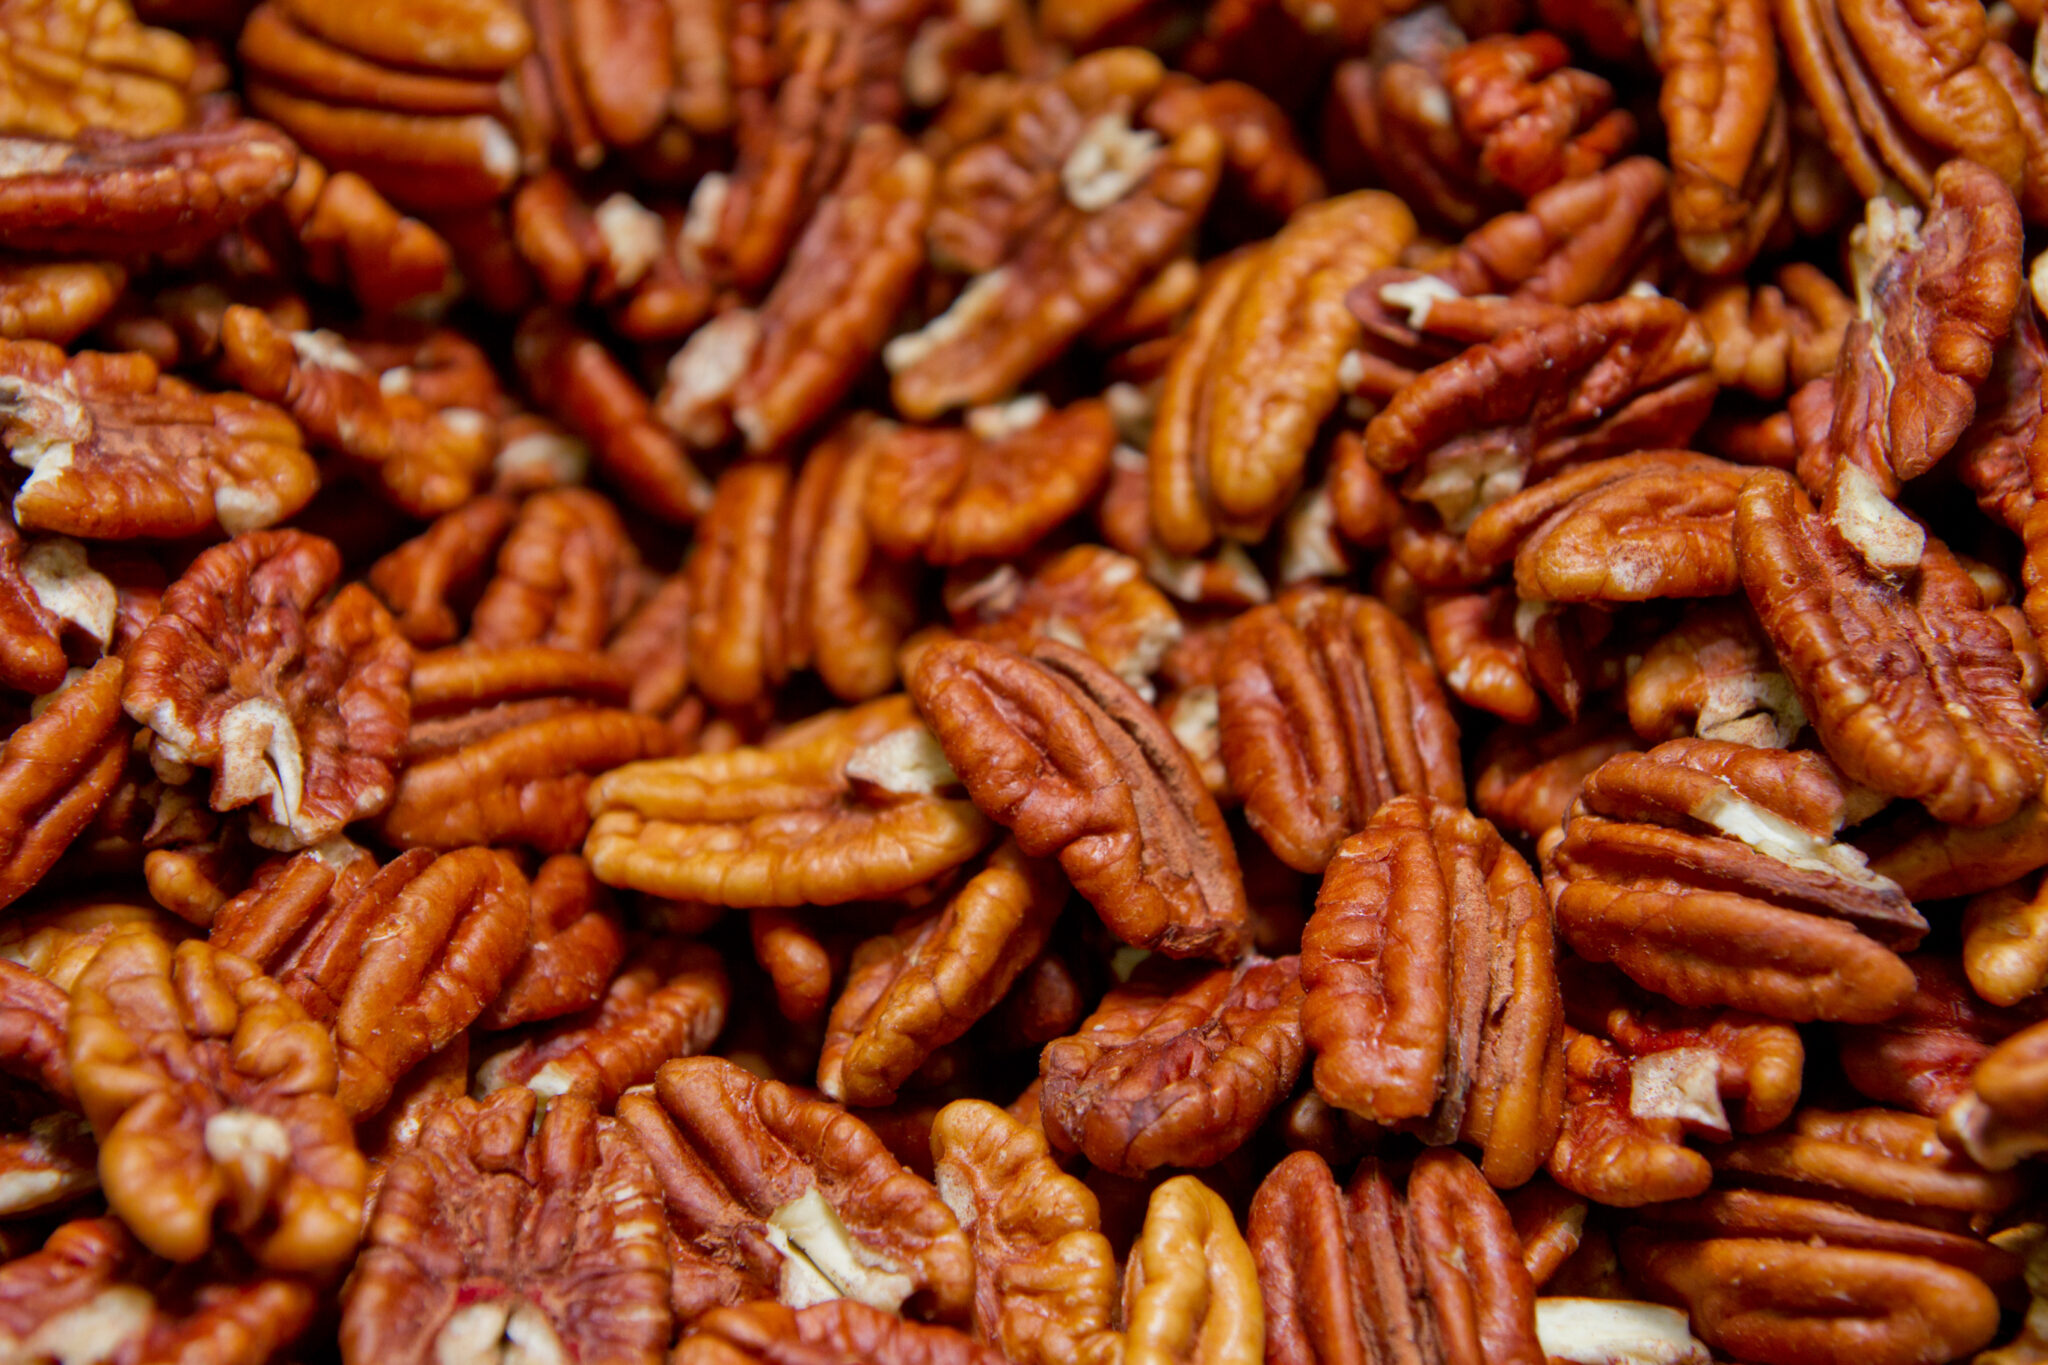 Background of nuts -